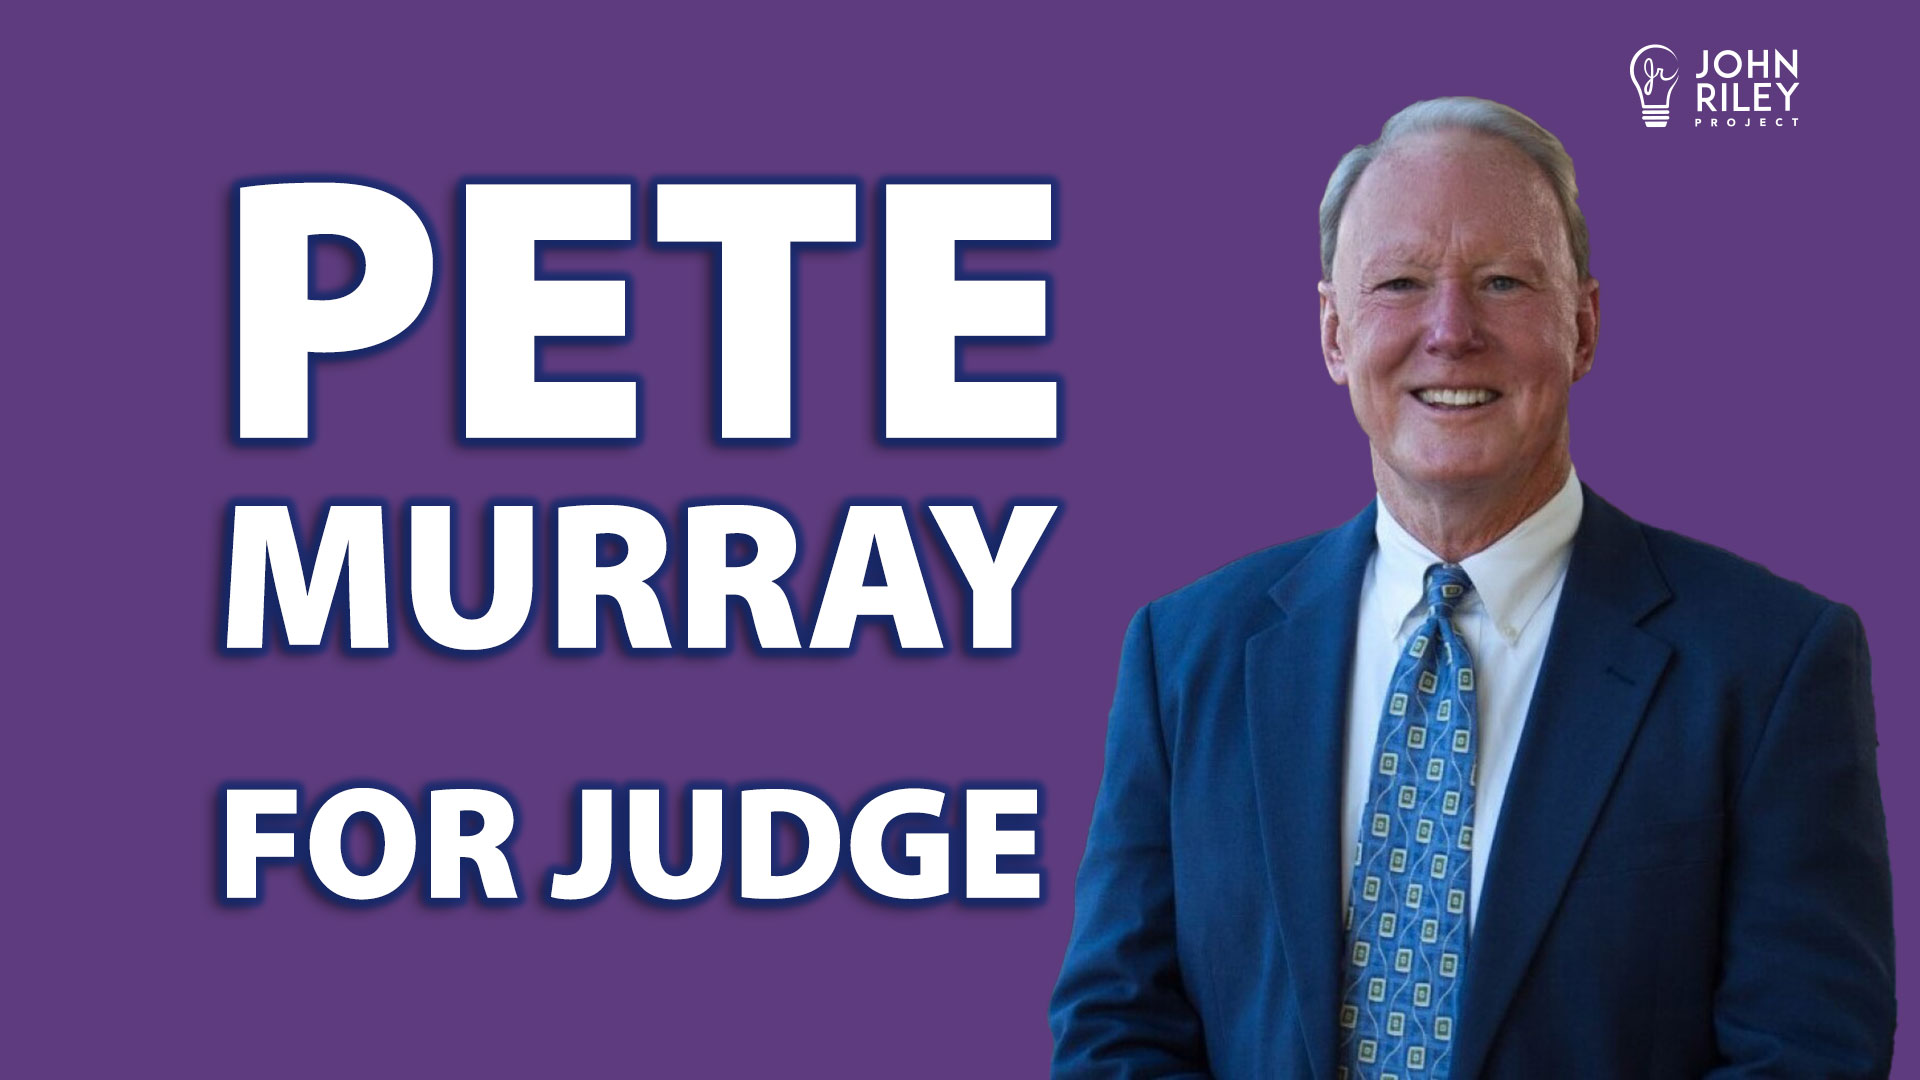 Pete Murray, san diego county, judge, criminal justice, john riley project, JRP0274